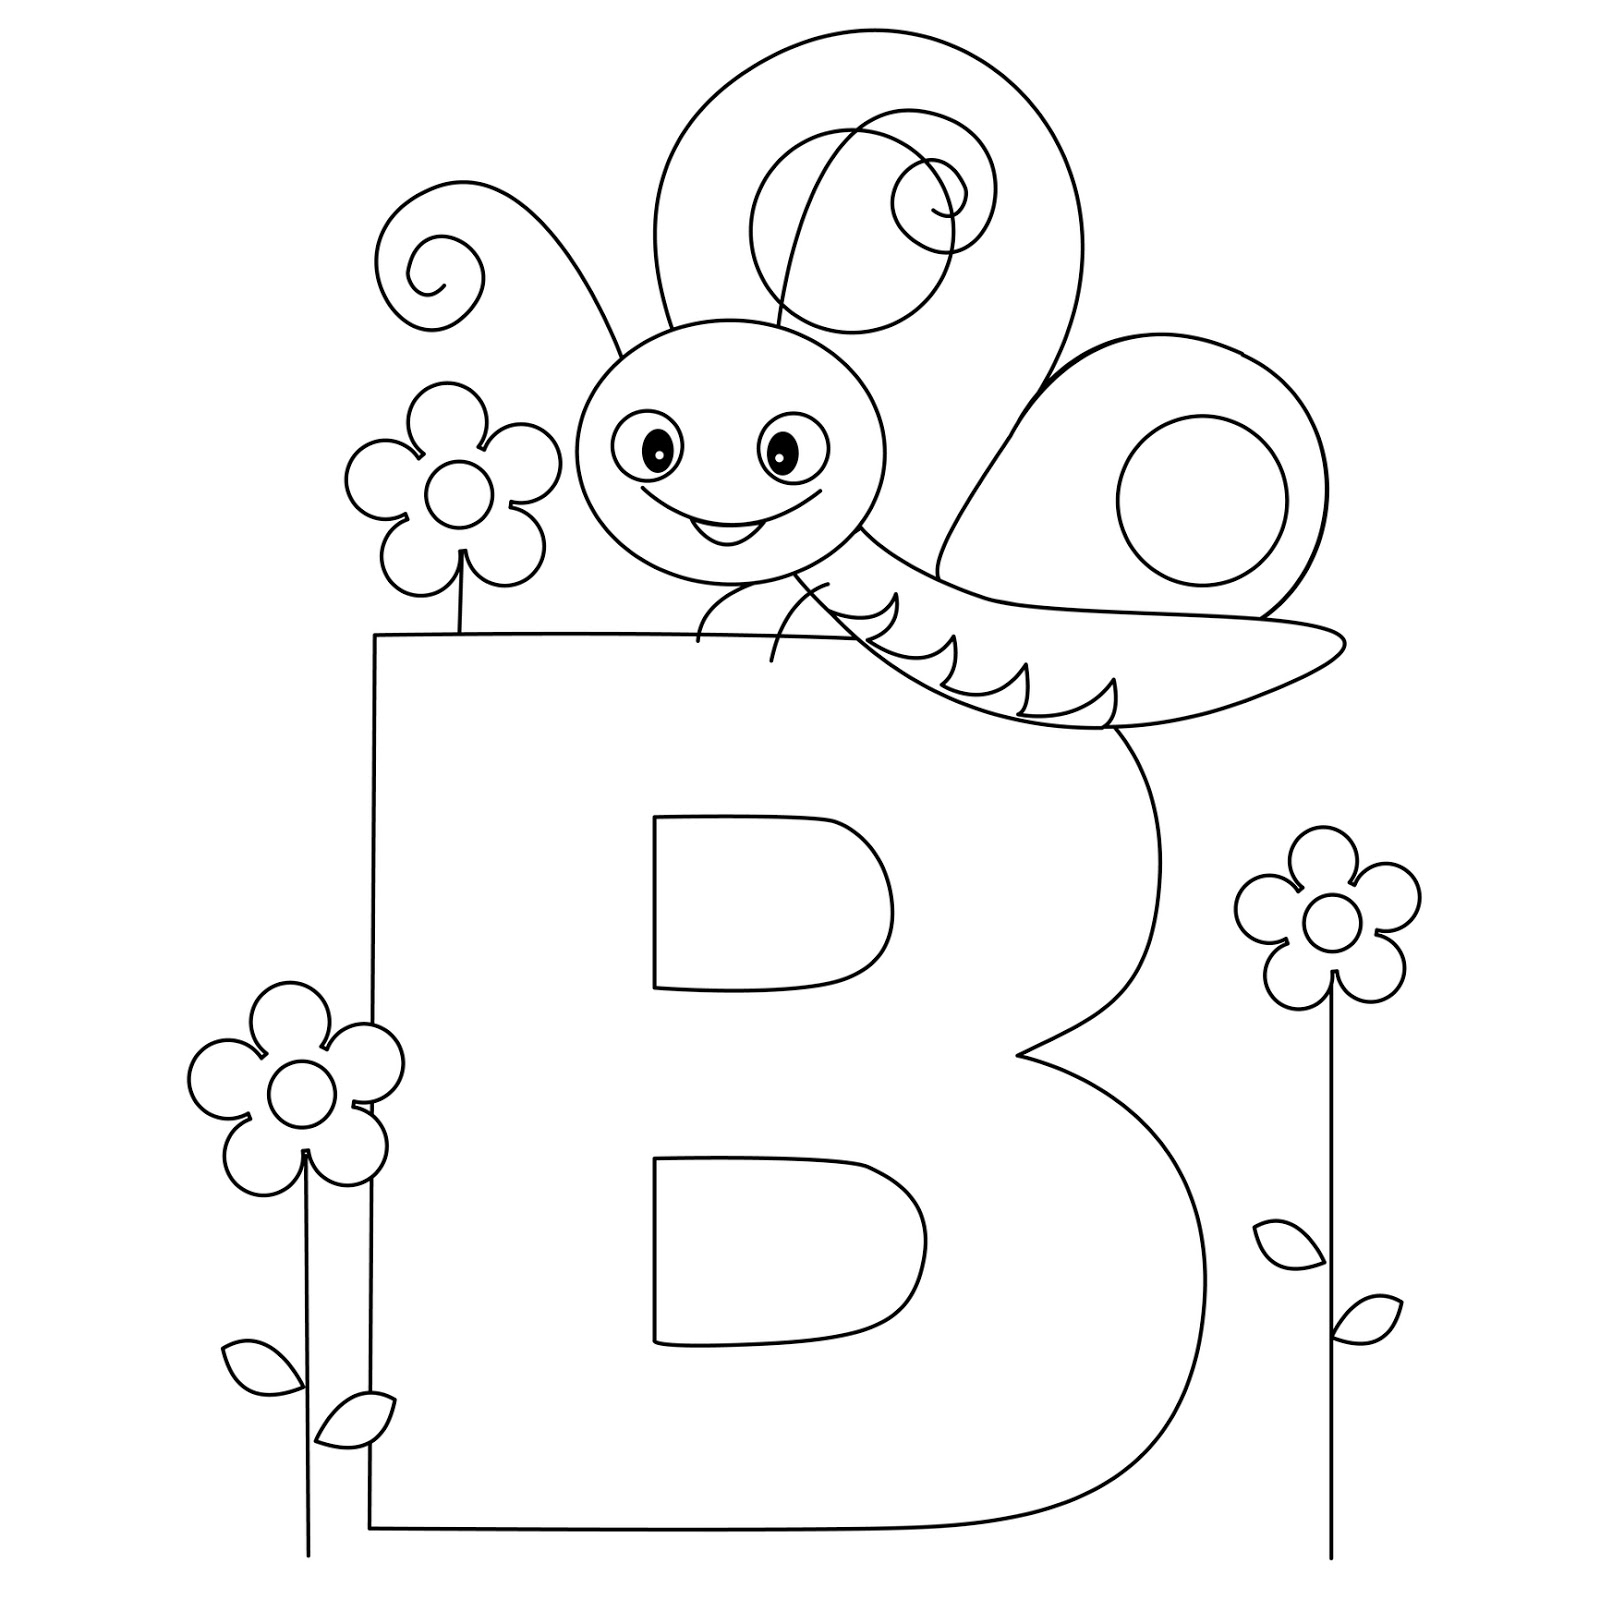 B for Bug Preschool Coloring Pages